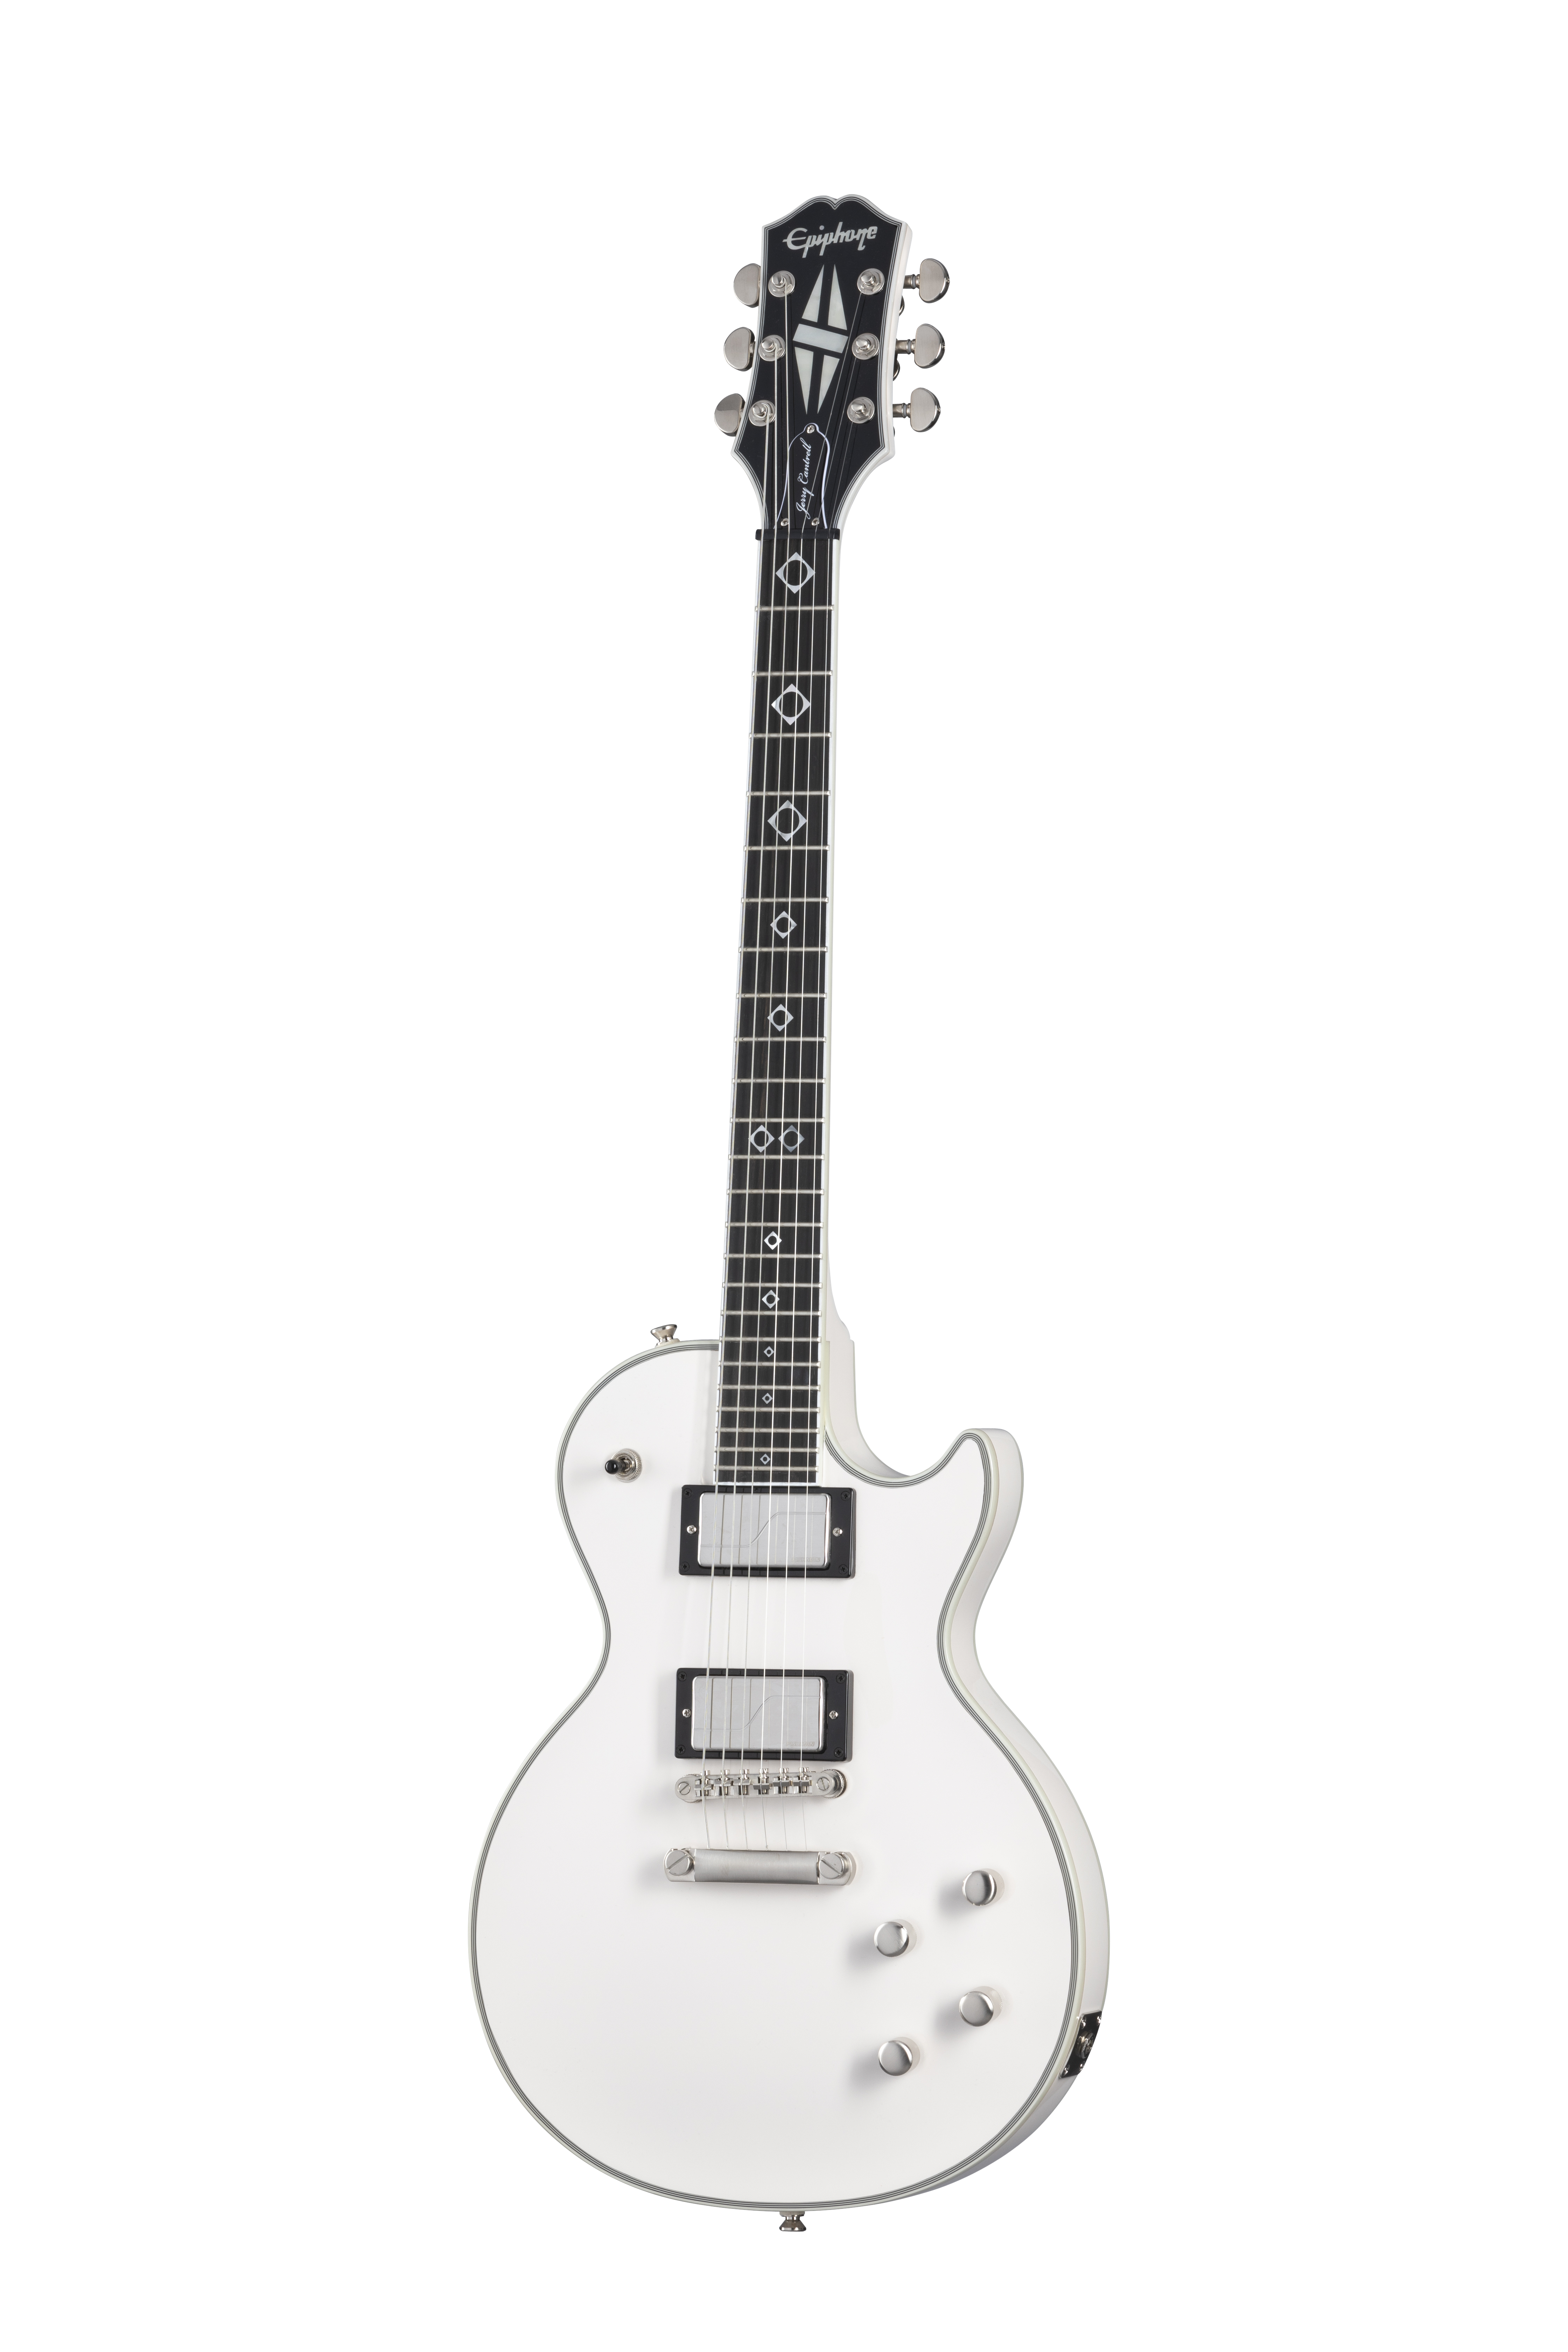 Jerry Cantrell Les Paul Custom Prophecy, Bone White | Epiphone